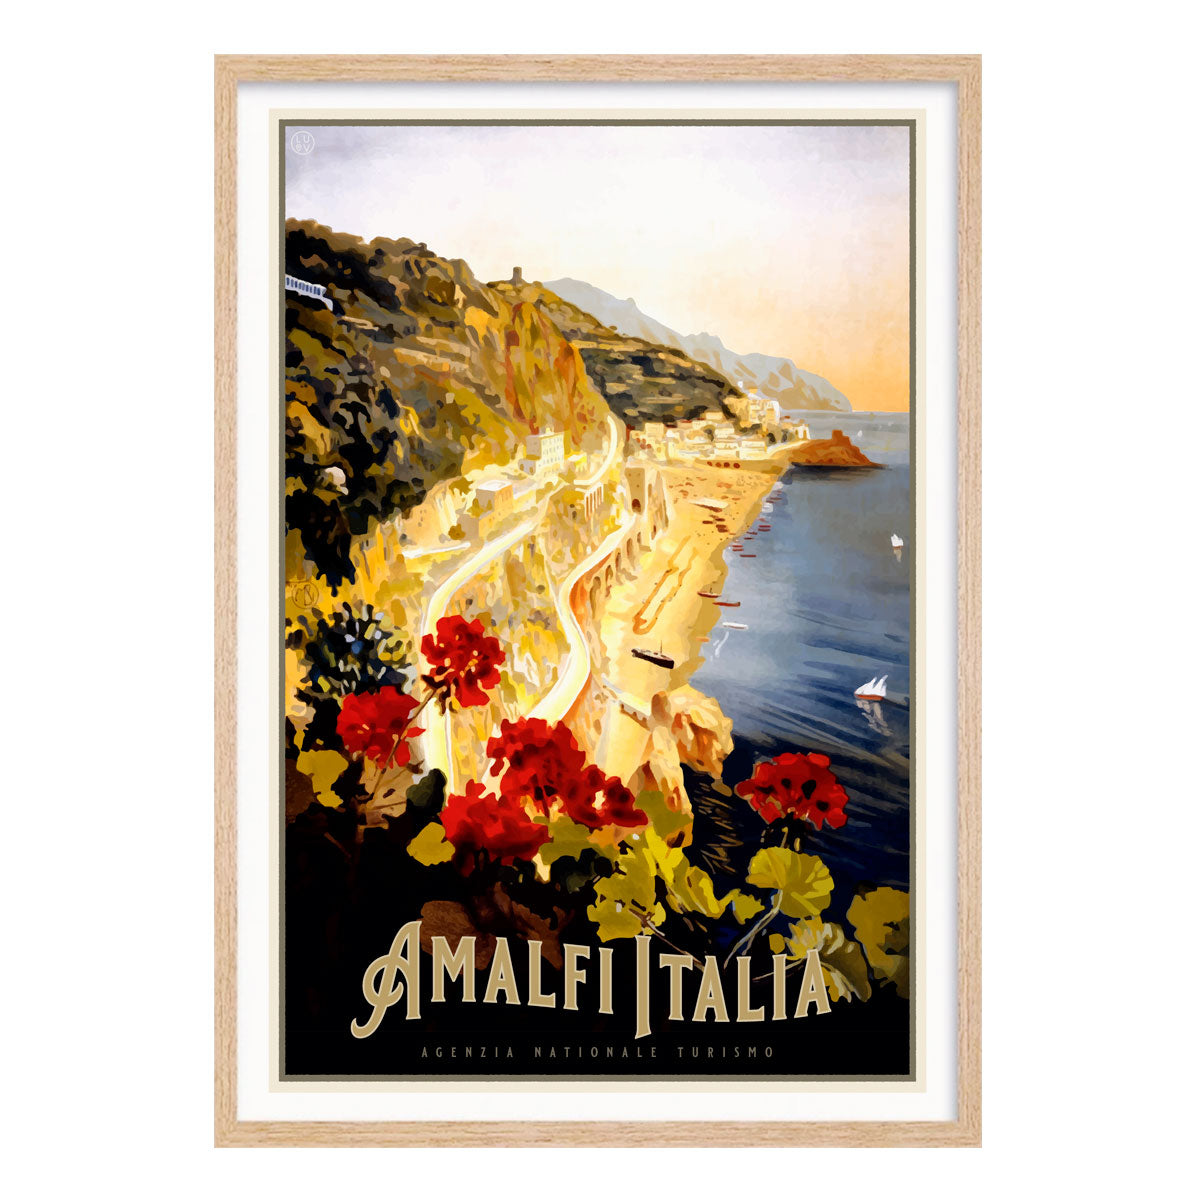 Amalfi retro vintage travel poster in oak frame from Places We Luv